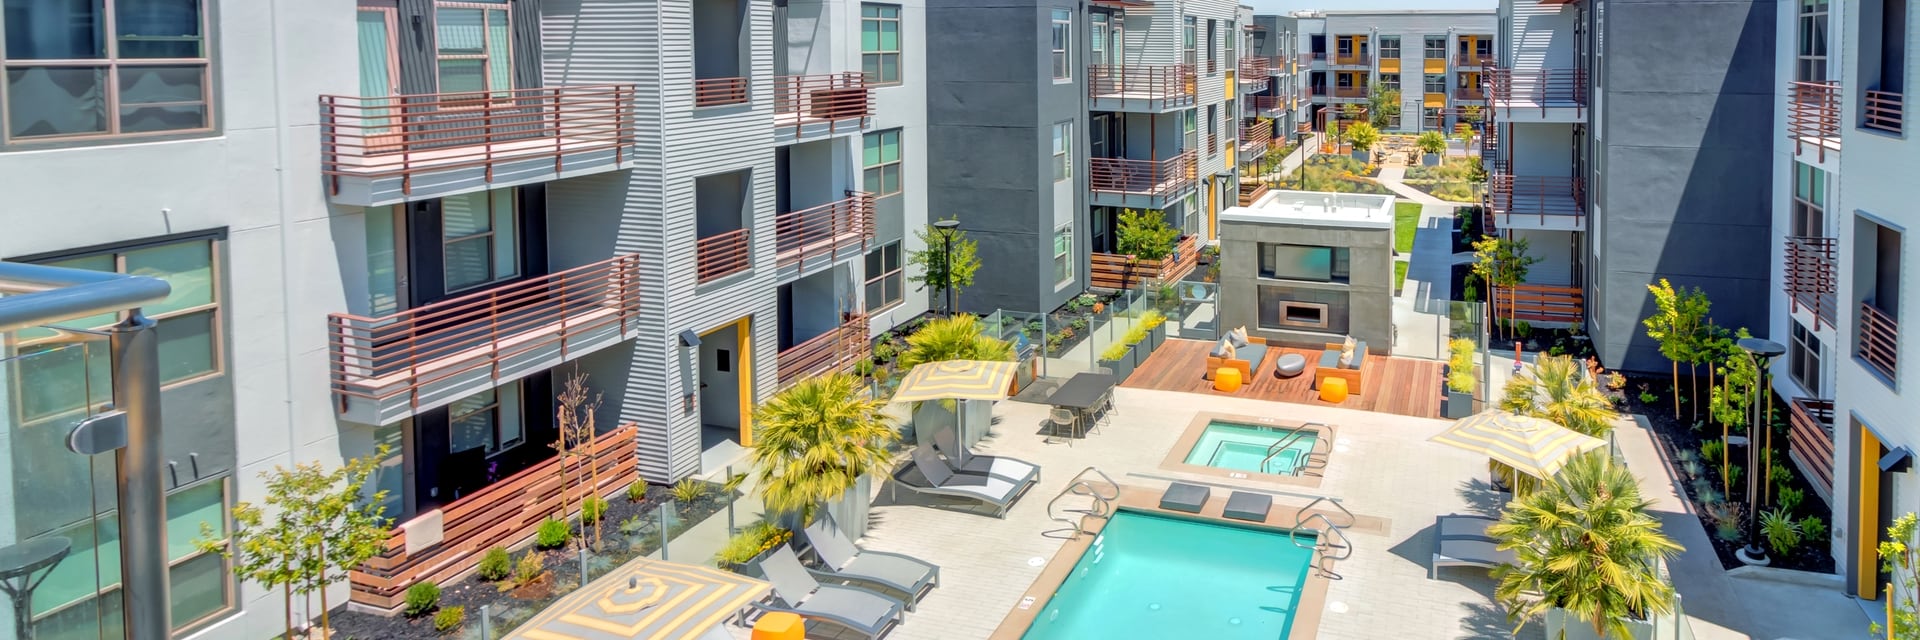 Menlo Park CA Apartments - Resort Style Swimming Pool Surrounded by Various Shaded Lounge Chairs